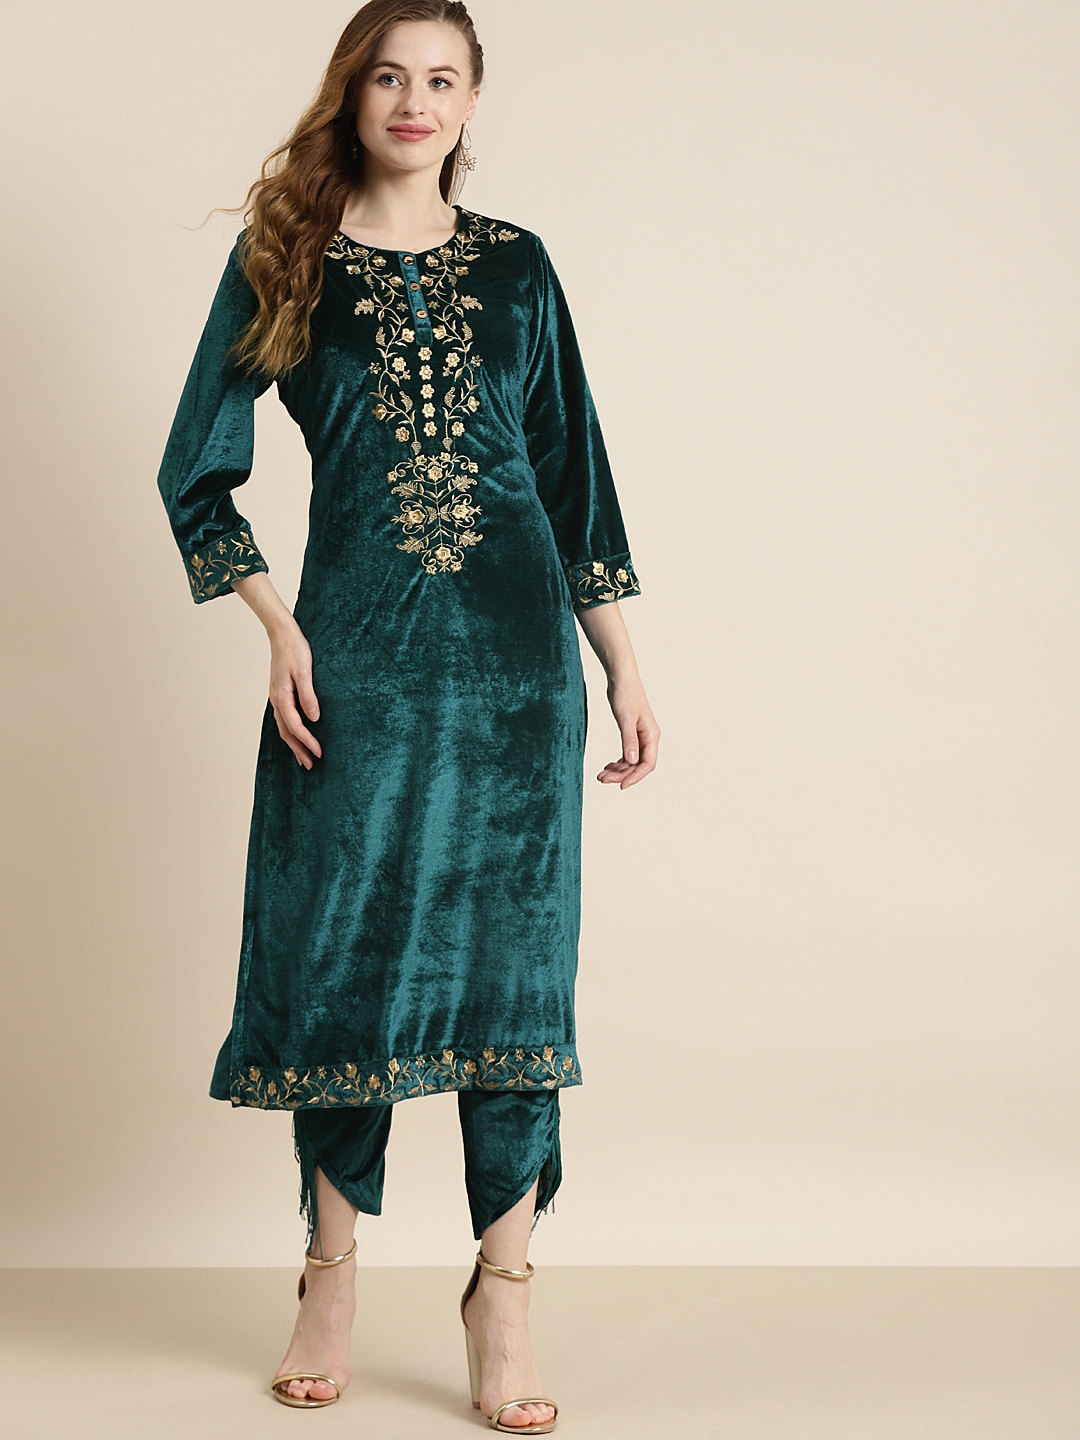 Buy Shae By SASSAFRAS Women Teal Green & Gold Toned Floral Embroidered ...